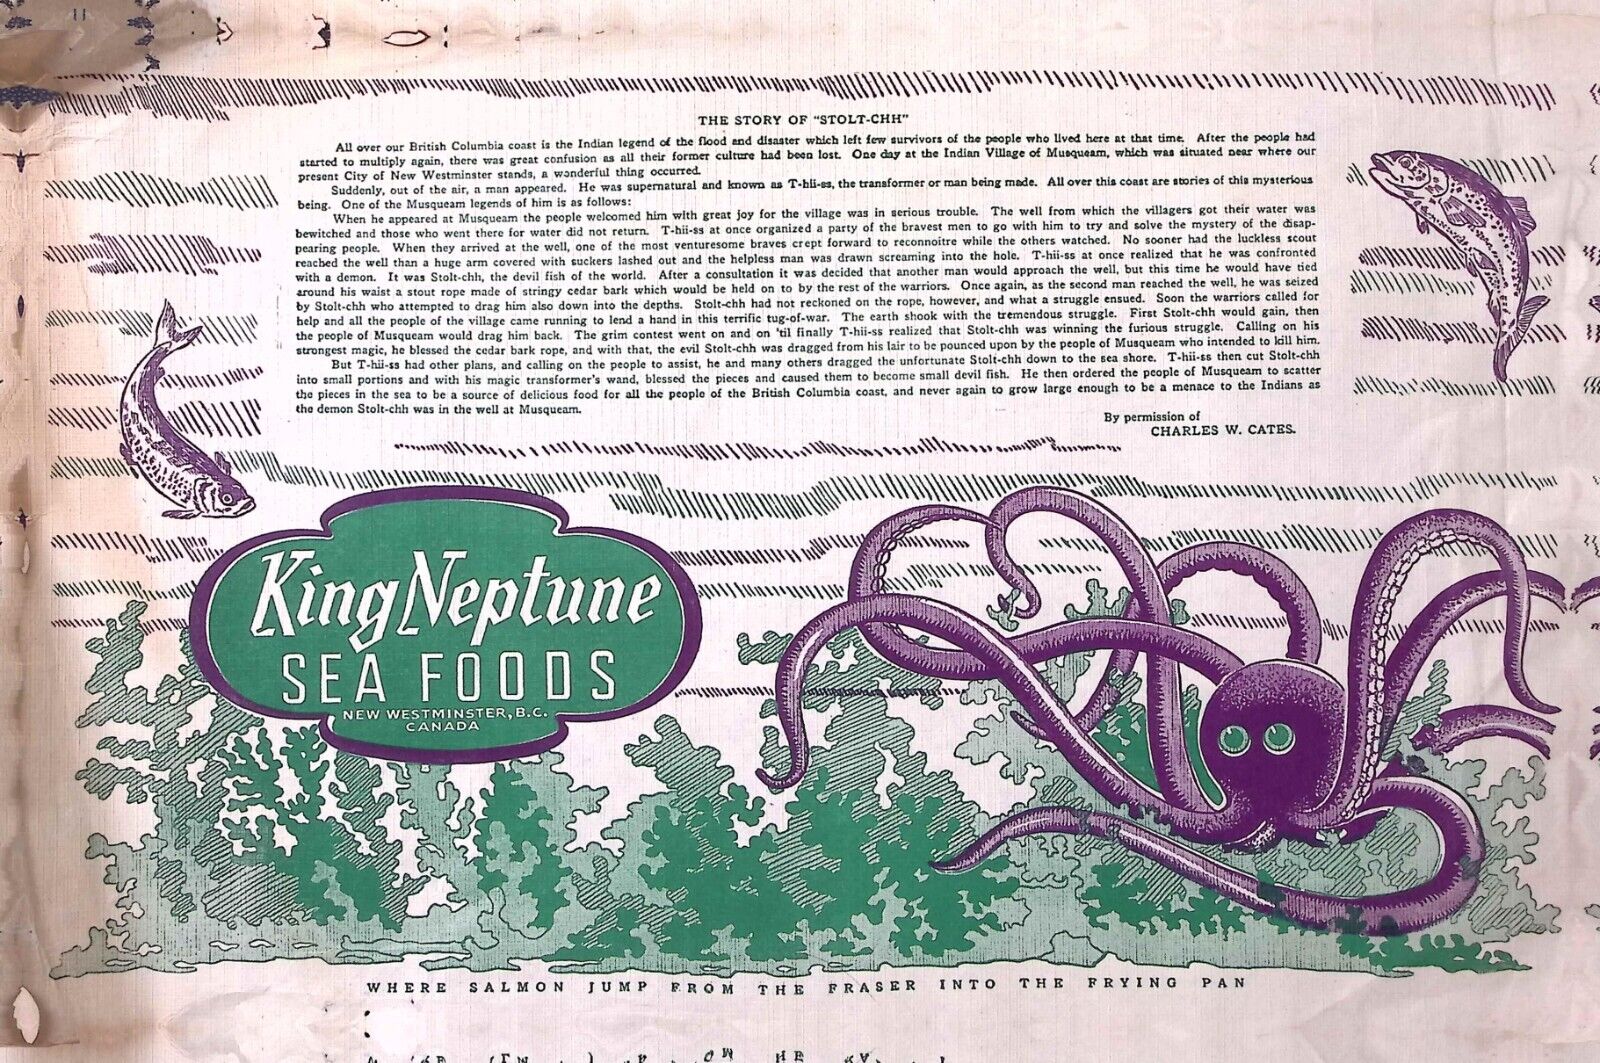 1950s KING NEPTUNE SEA FOODS NEW WESTMINSTER B.C. ADVERTISING PLACEMAT MENU W73